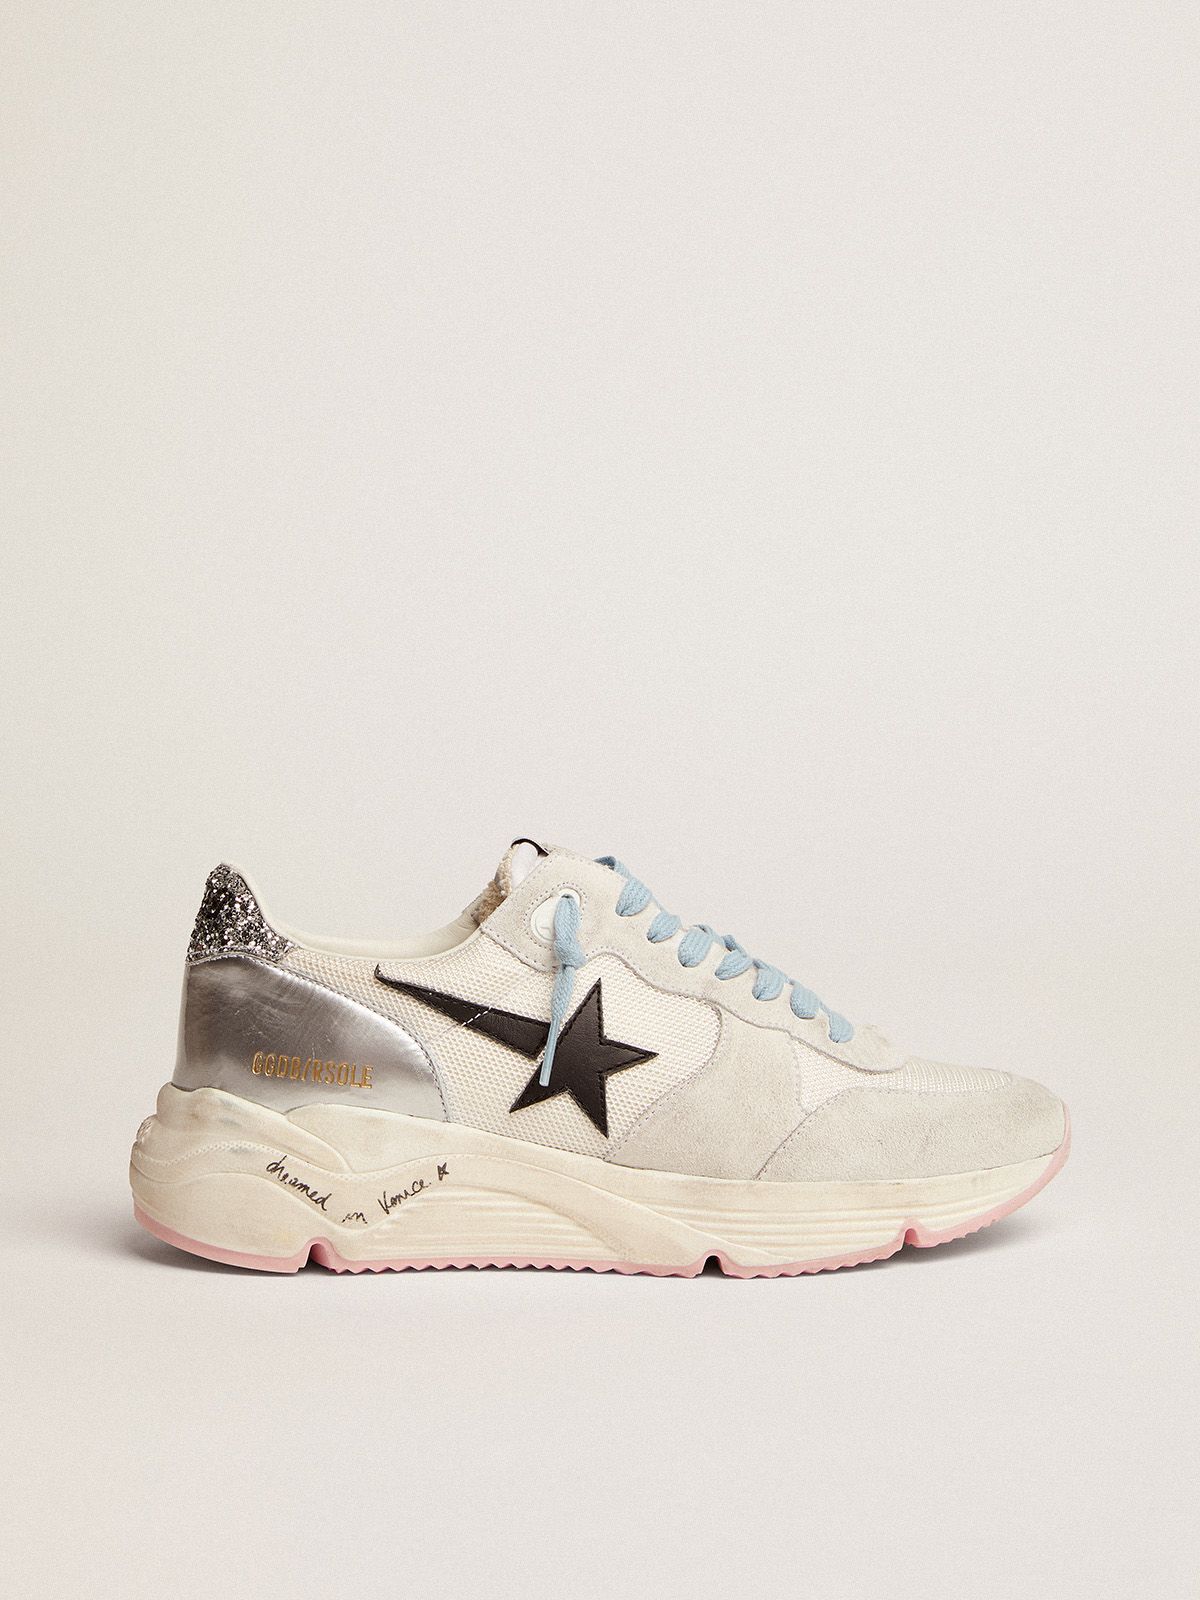 golden goose Running and suede LTD heel silver in tab mesh with white star sneakers Sole black leather glitter